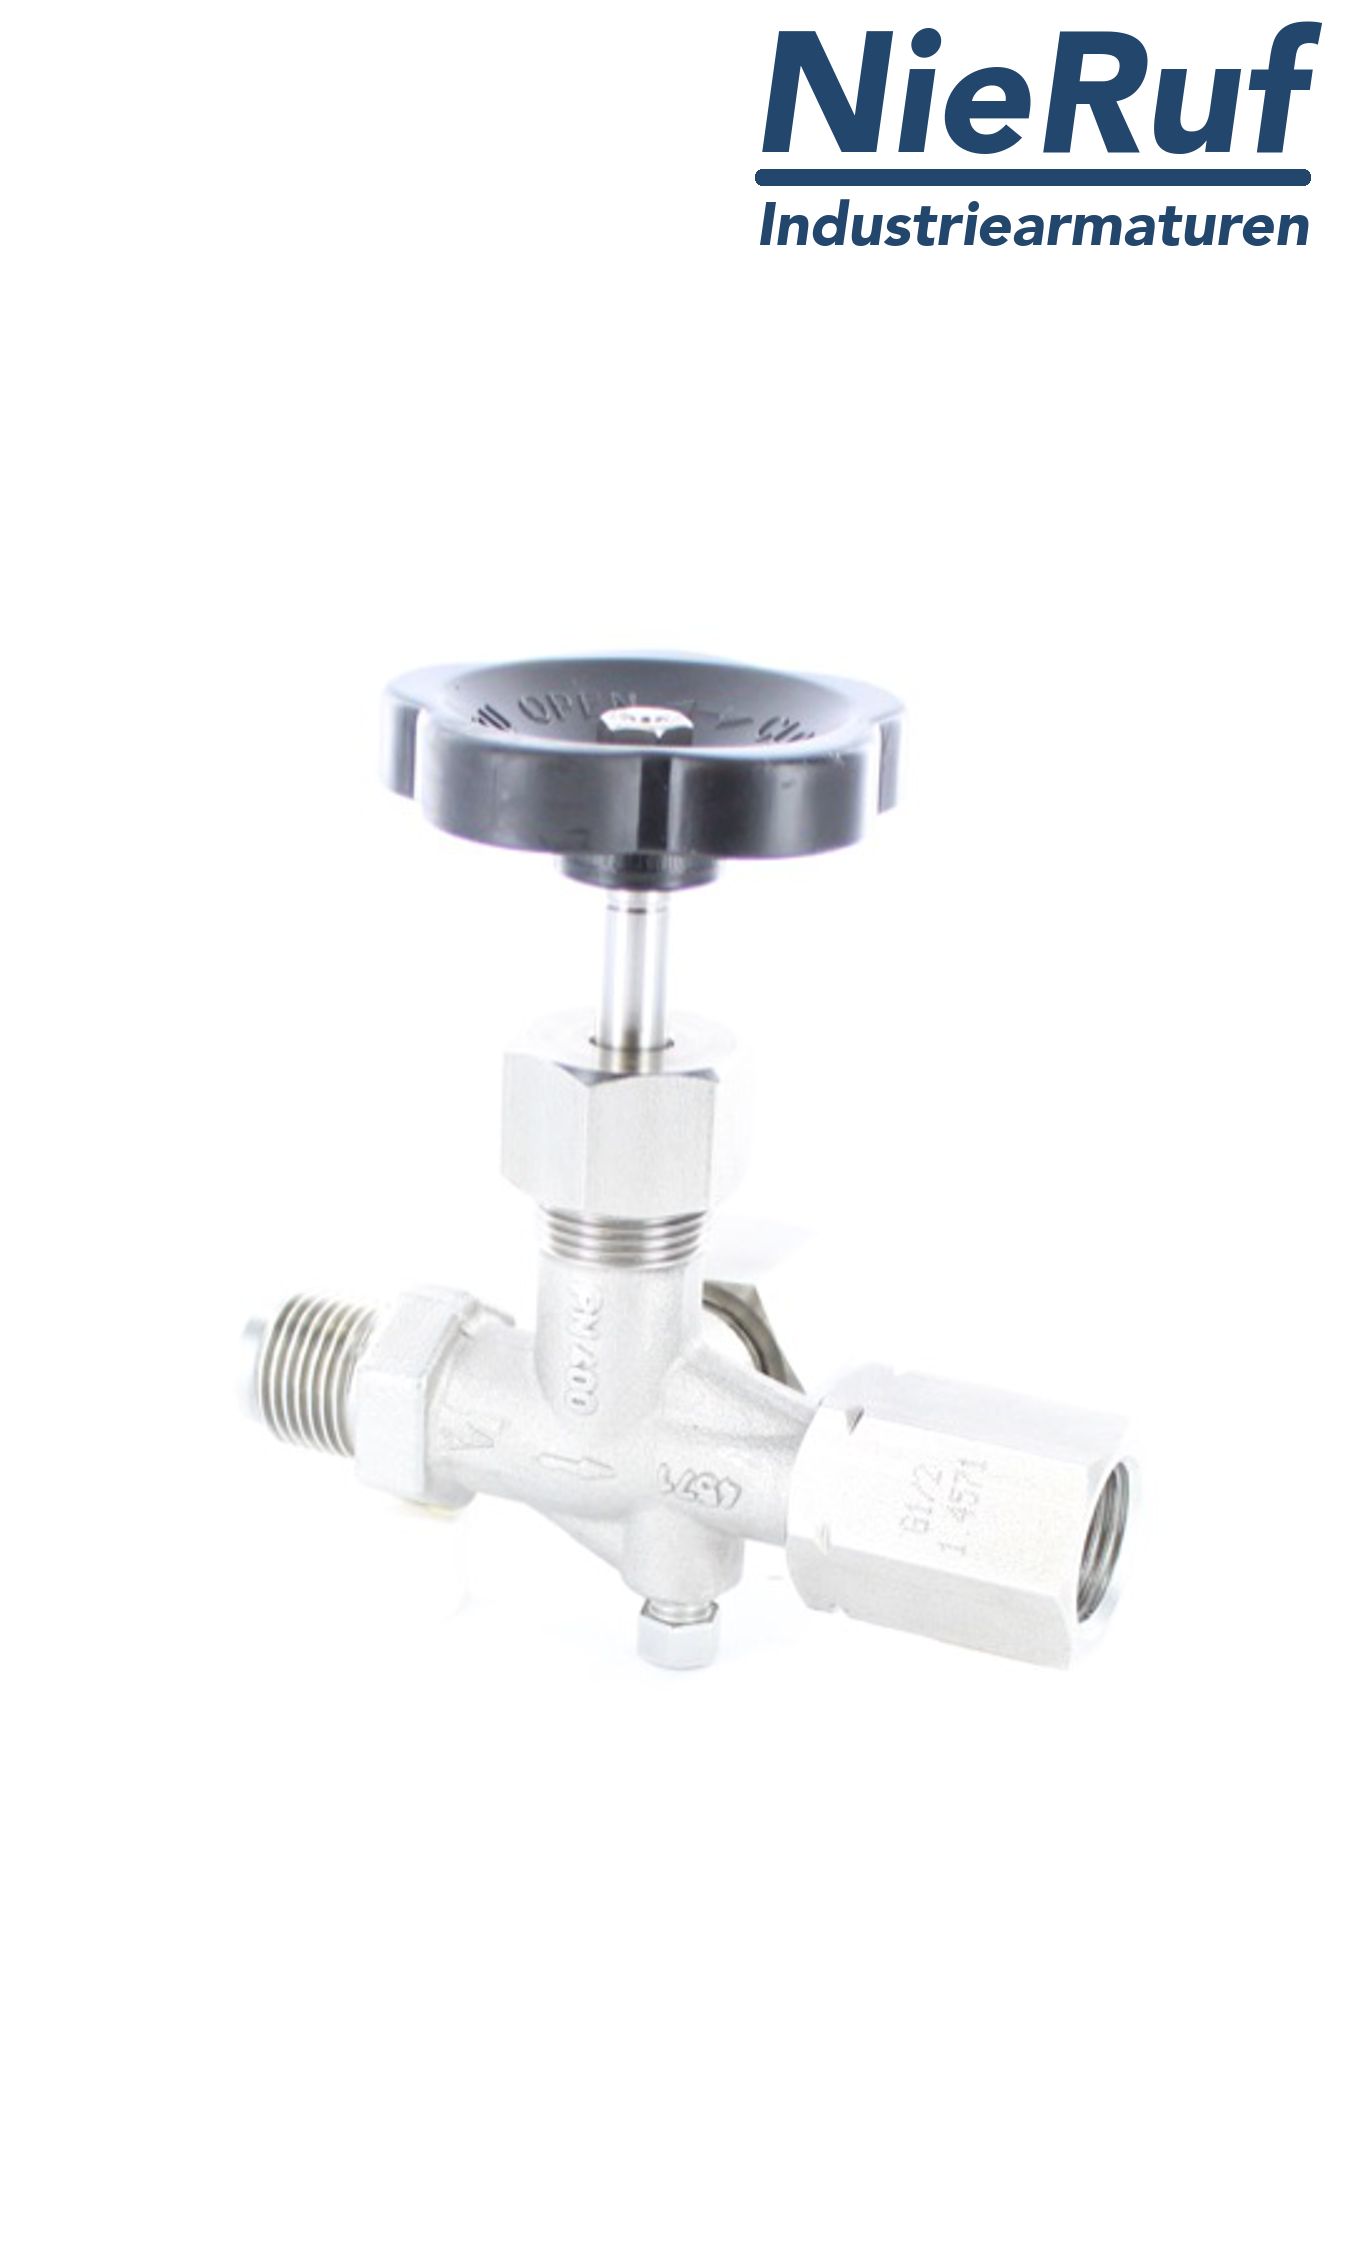 manometer gauge valves male thread x adapter for instrument holder with nut adjustable x test connector M20x1,5 DIN 16271 stainless steel 1.4571 400 bar